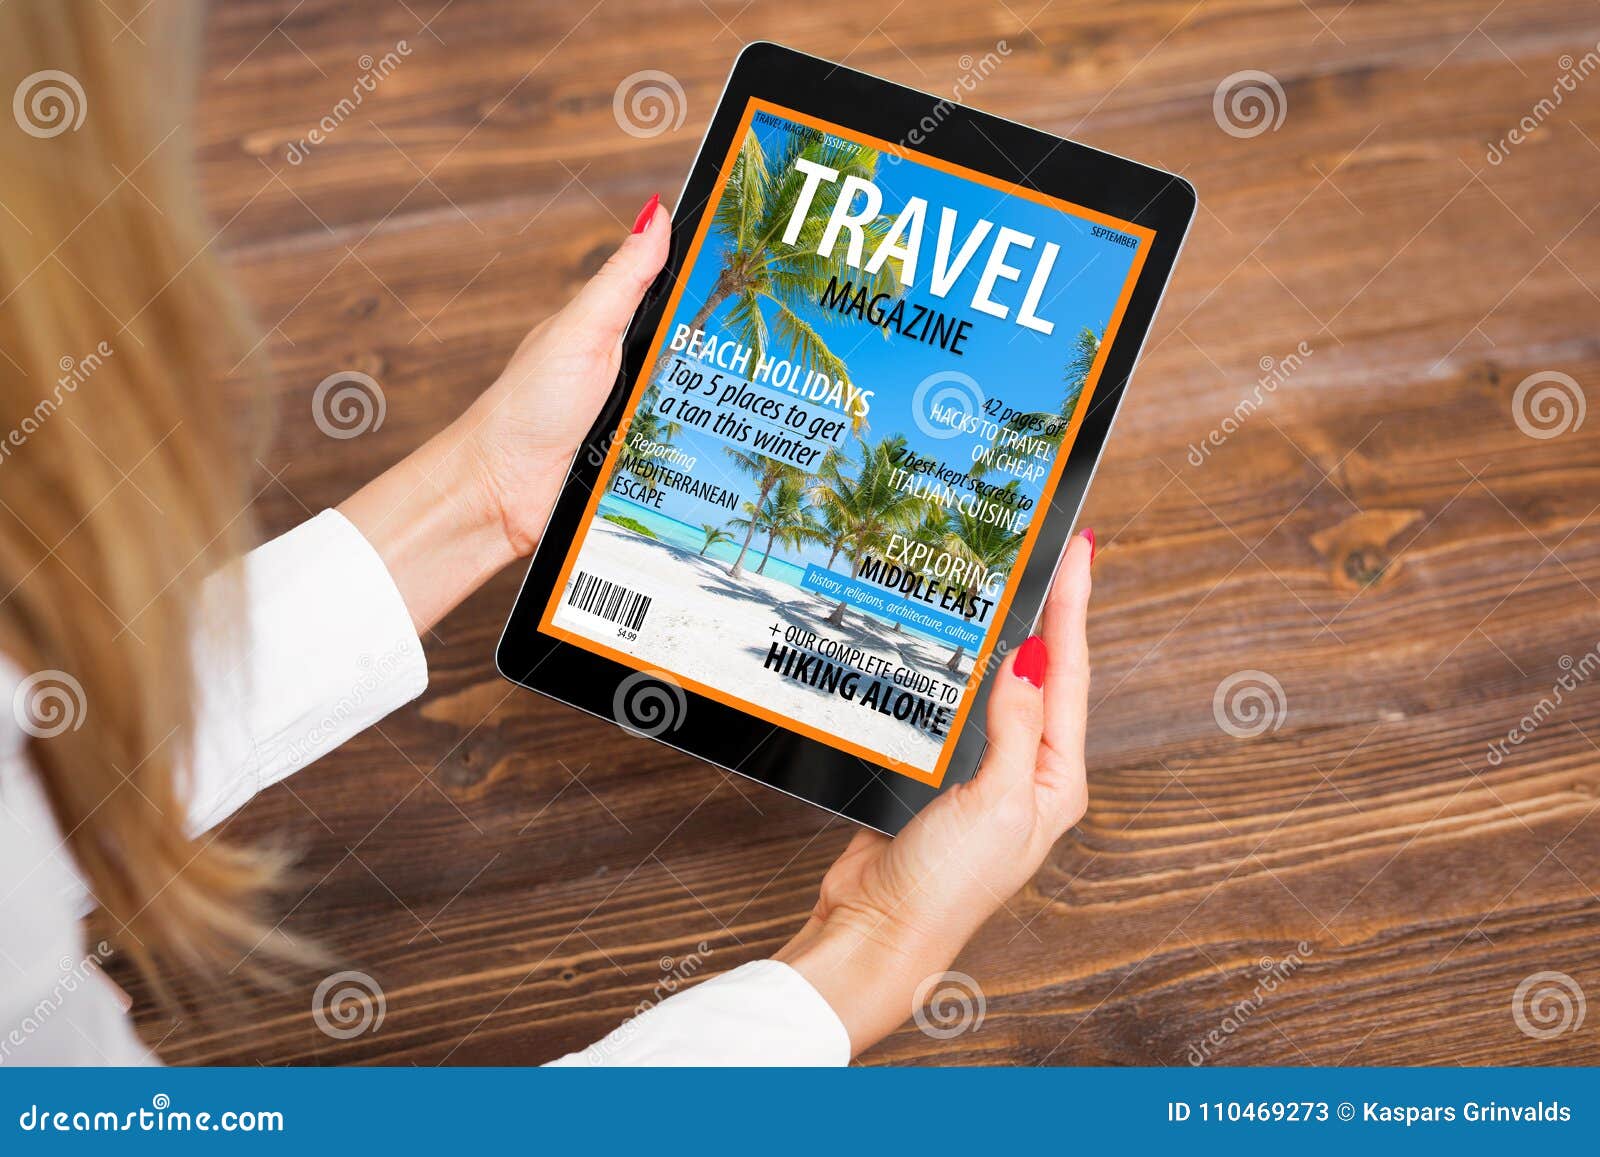 woman reading travel magazine on tablet